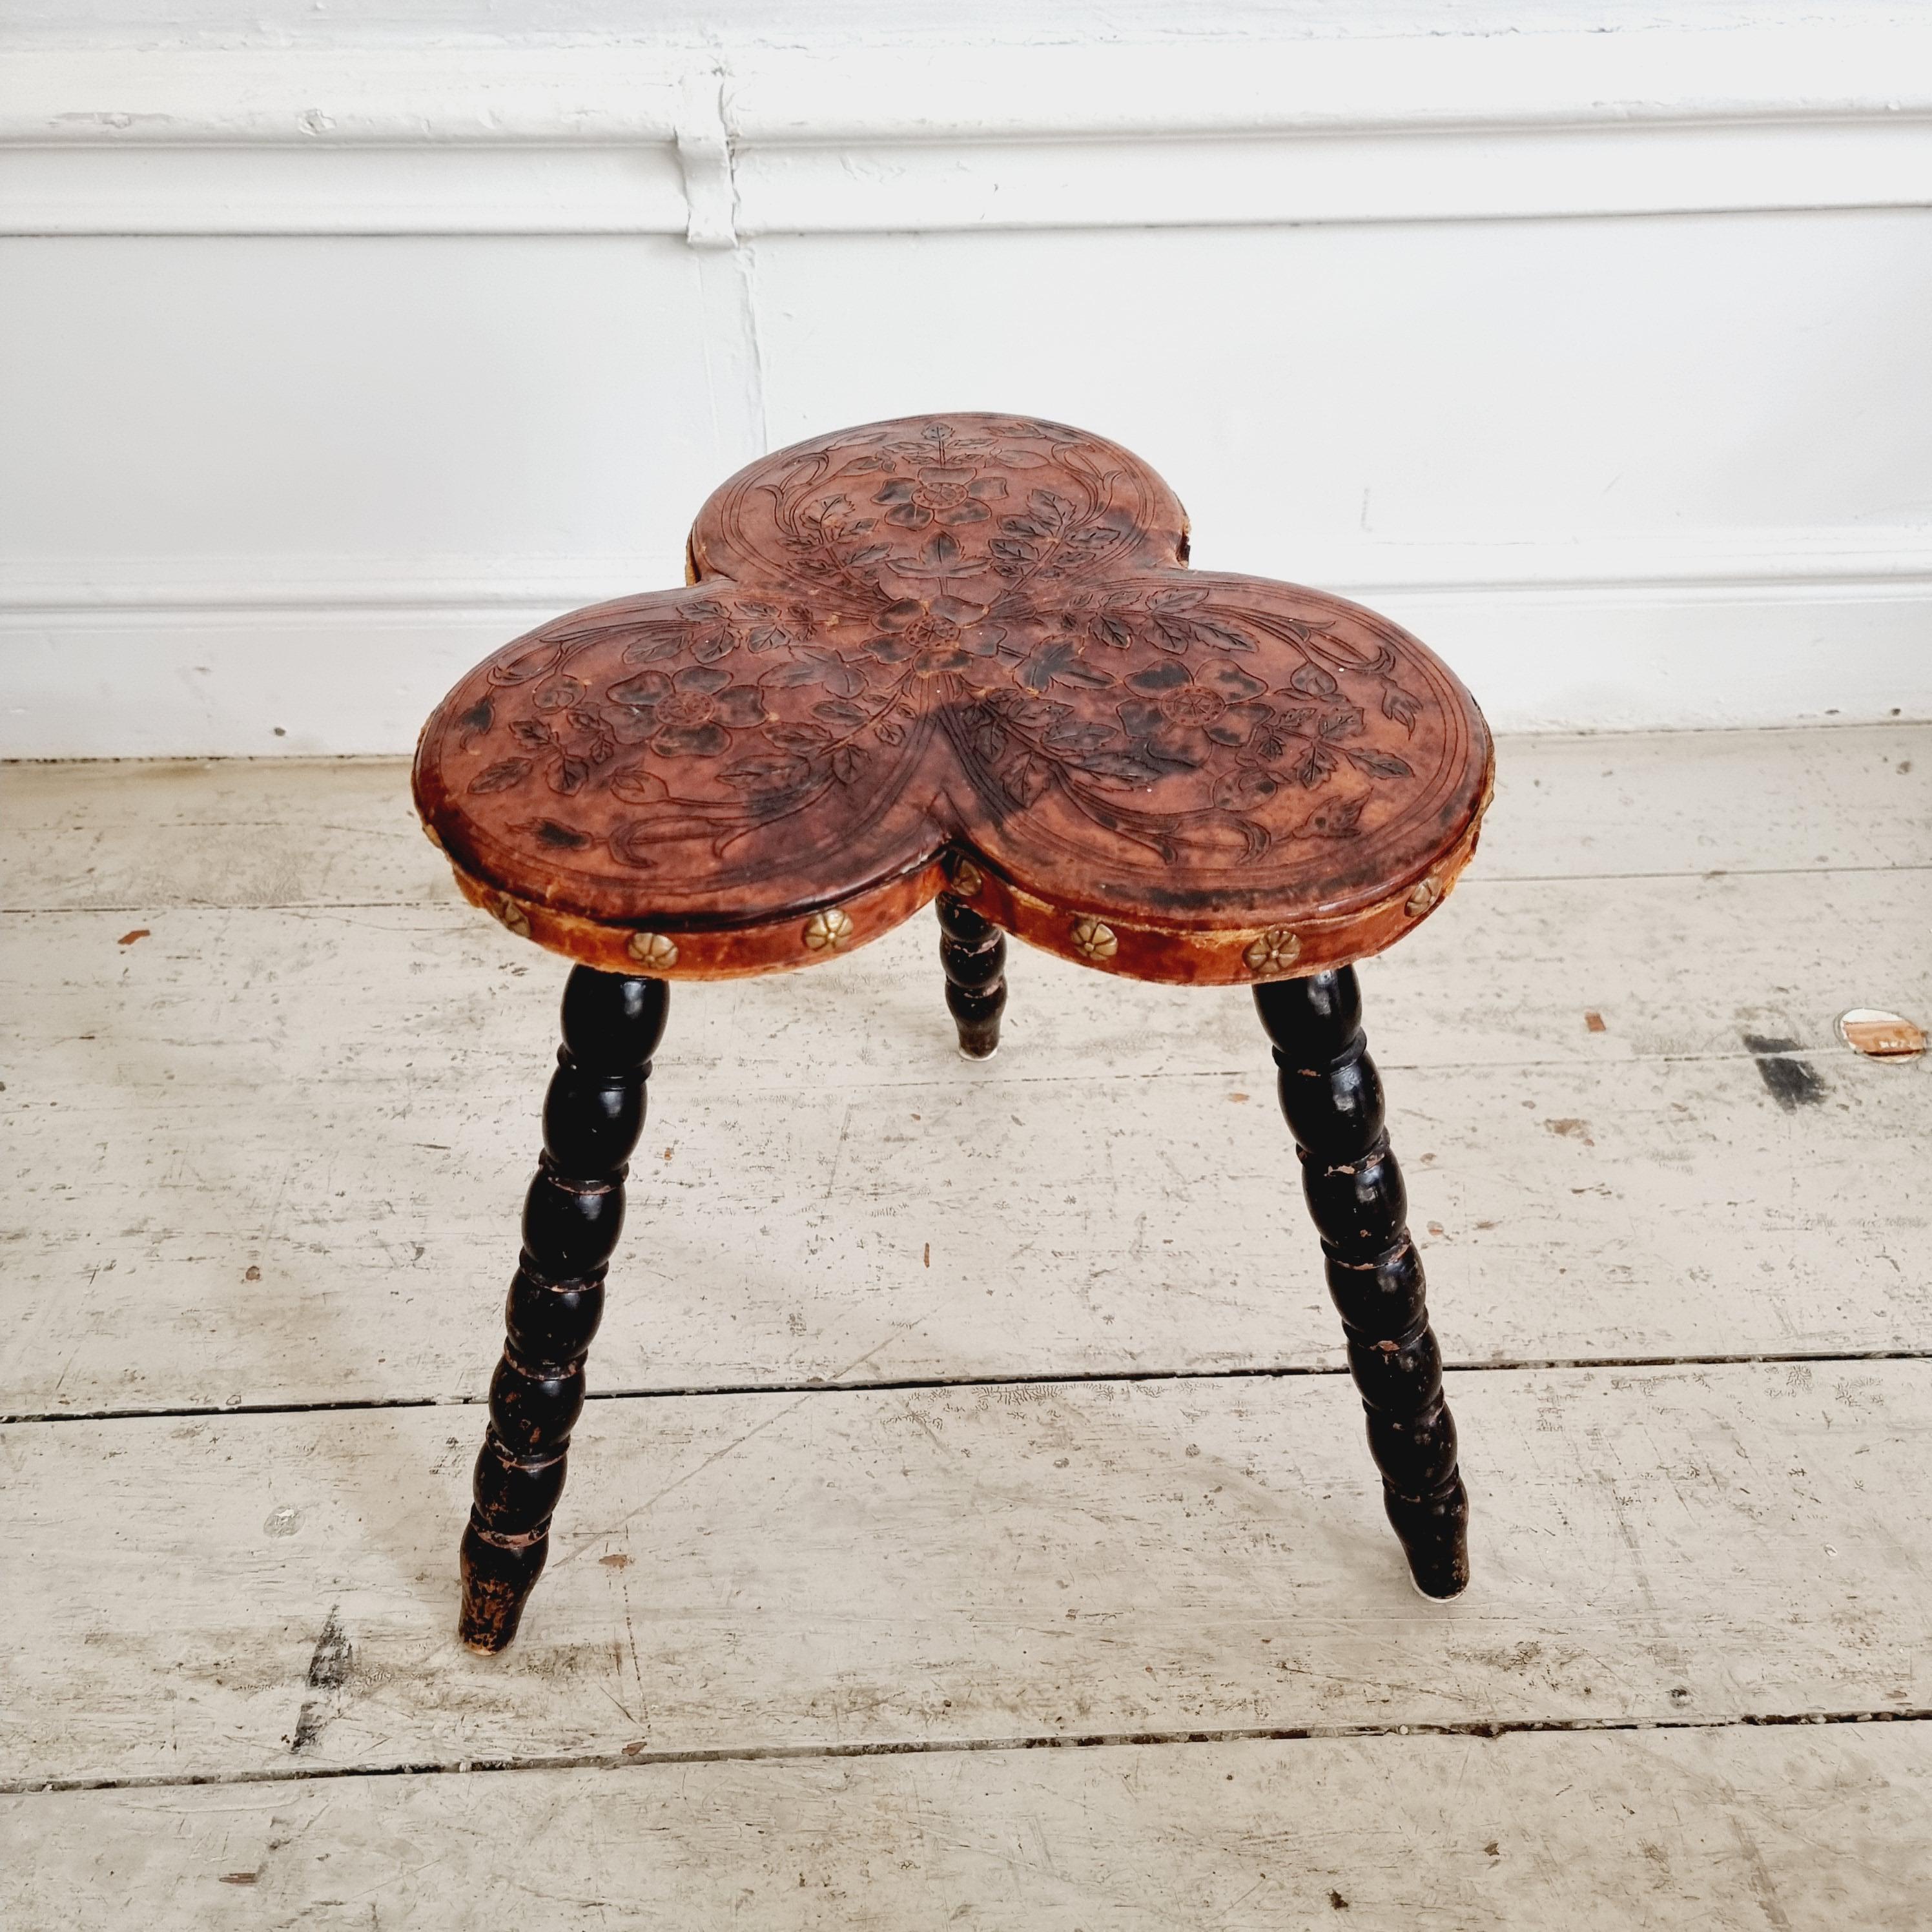 Stool with turned legs and embossed leather, decor of flowers and leafs, in Baroque Style / Baroque revival, early 1900s. Provenience:  woodworker Kenneth Pettersson Ånimskog. 

Worn, smaller damages to leather, signs of use and age. Stable. 